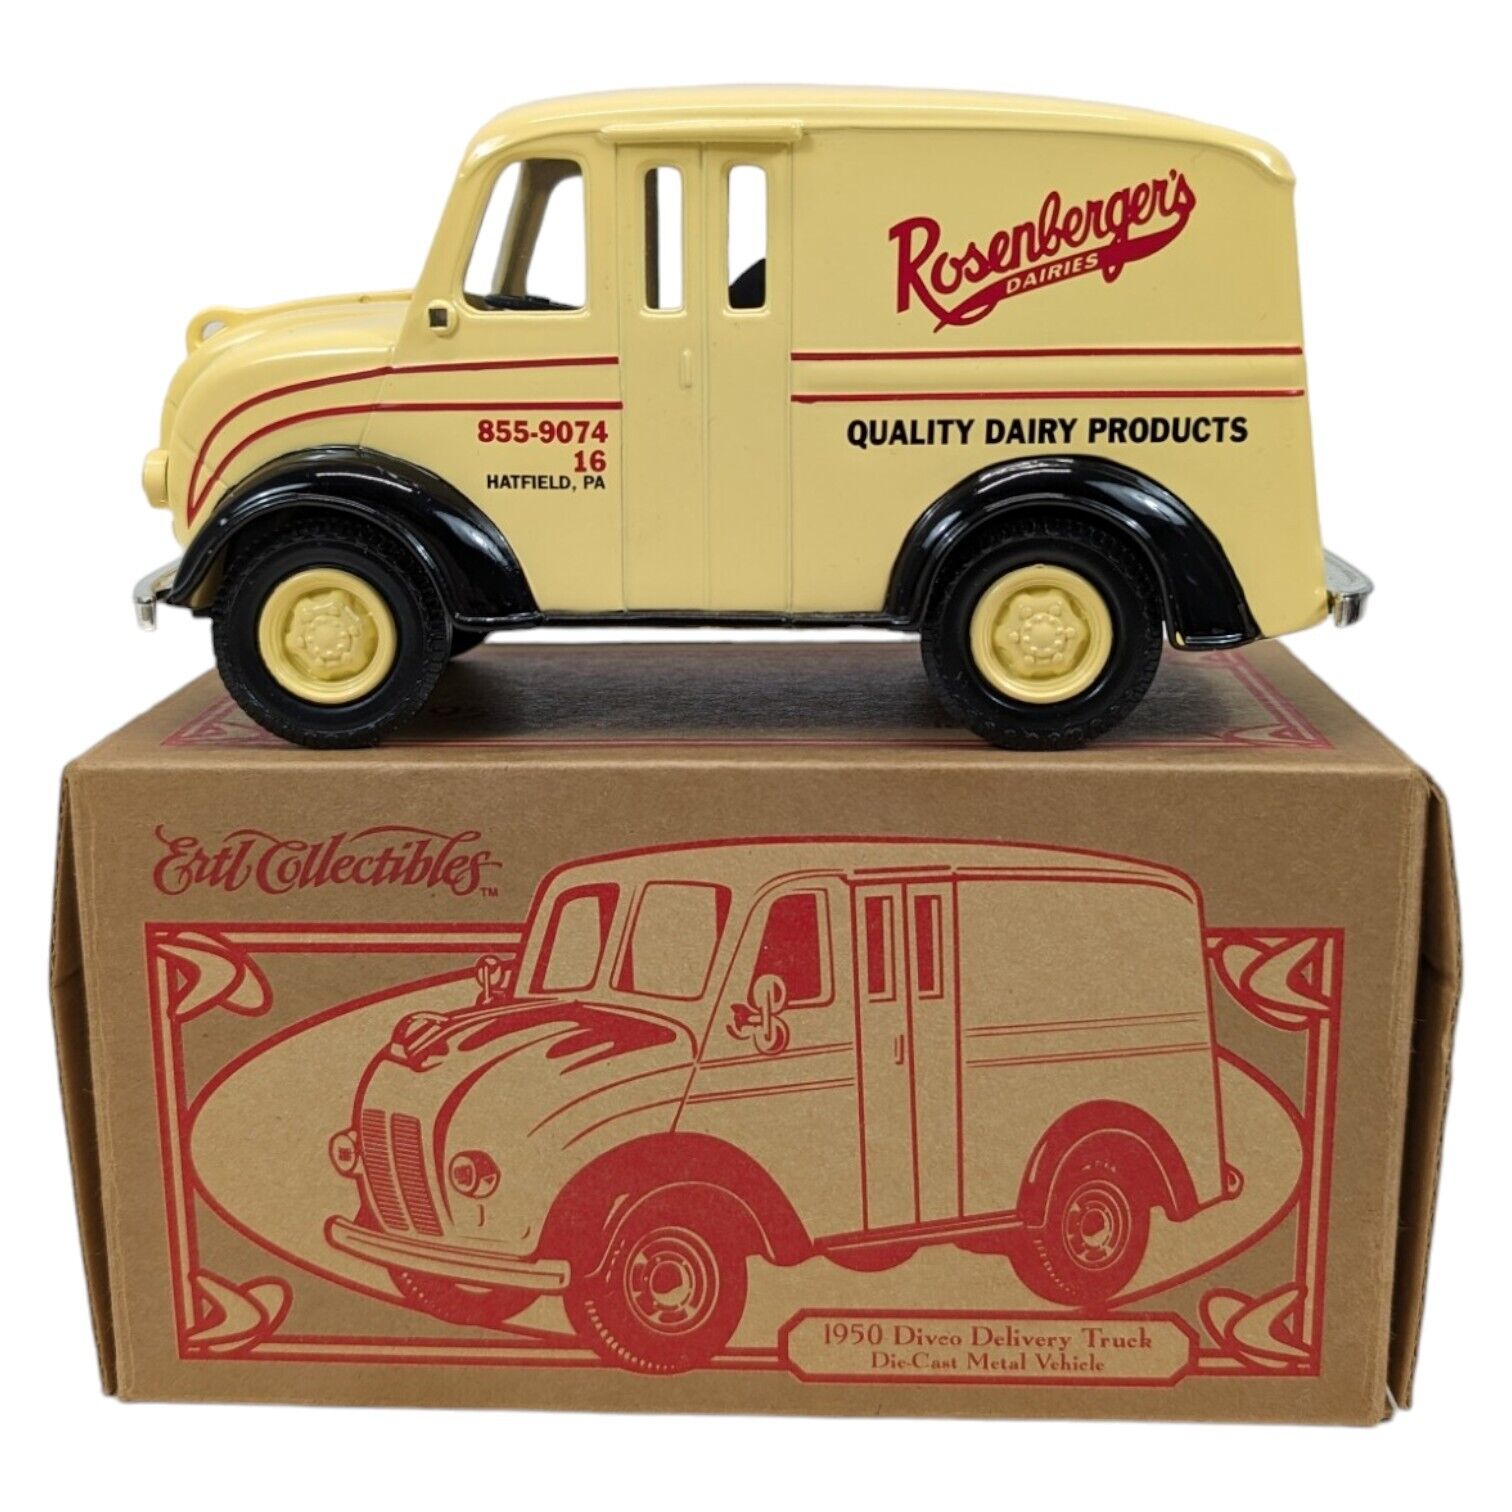 Ertl Collectible 1950 Divco Delivery Truck Diecast Rosenberger’s Dairies Bank